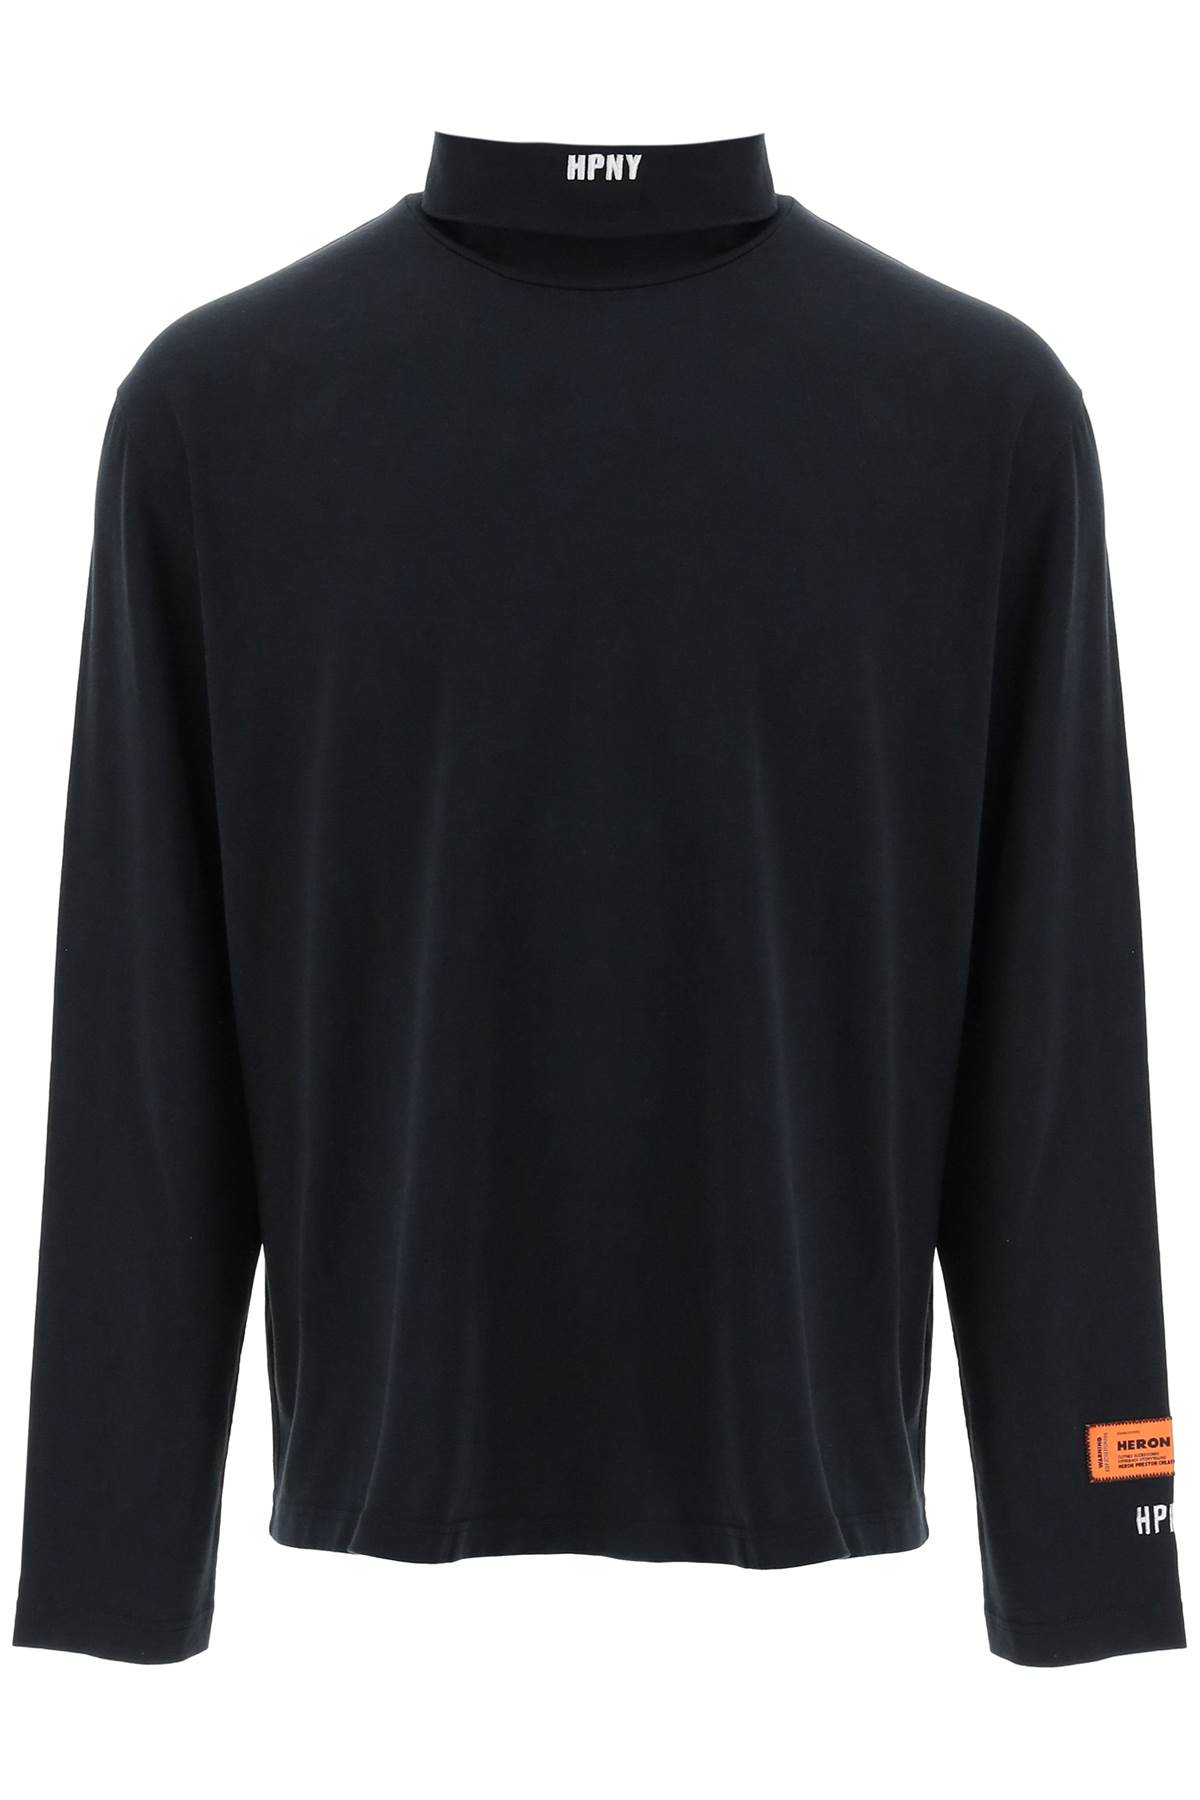 Shop Heron Preston Hpny Embroidered Long Sleeve T-shirt In Black Whit